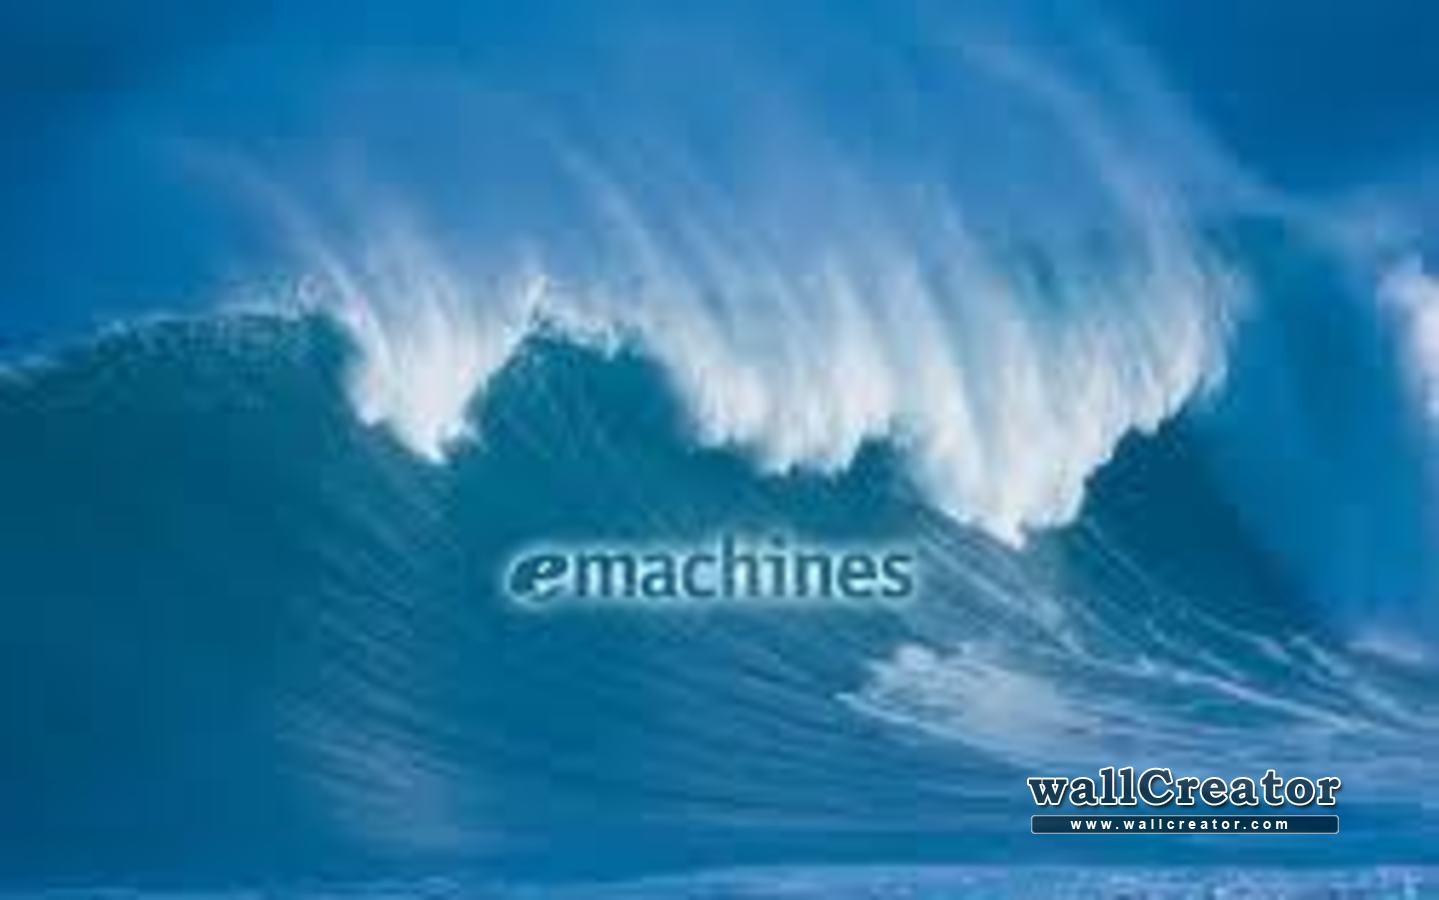 Emachines Wallpapers - Wallpaper Cave